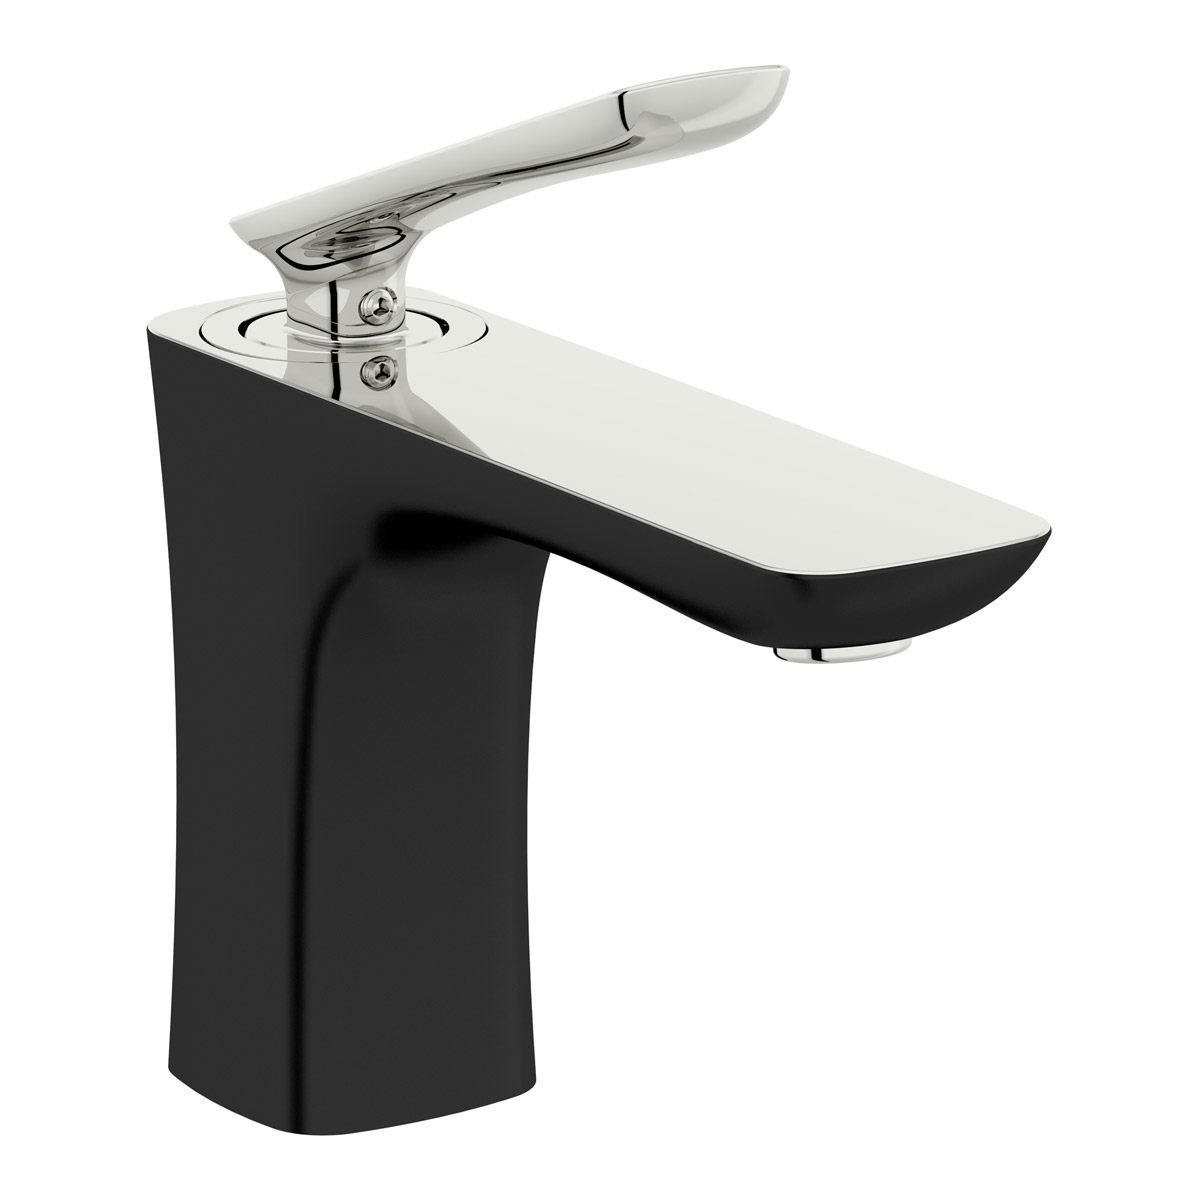 Mode Aalto black basin mixer tap with slotted waste